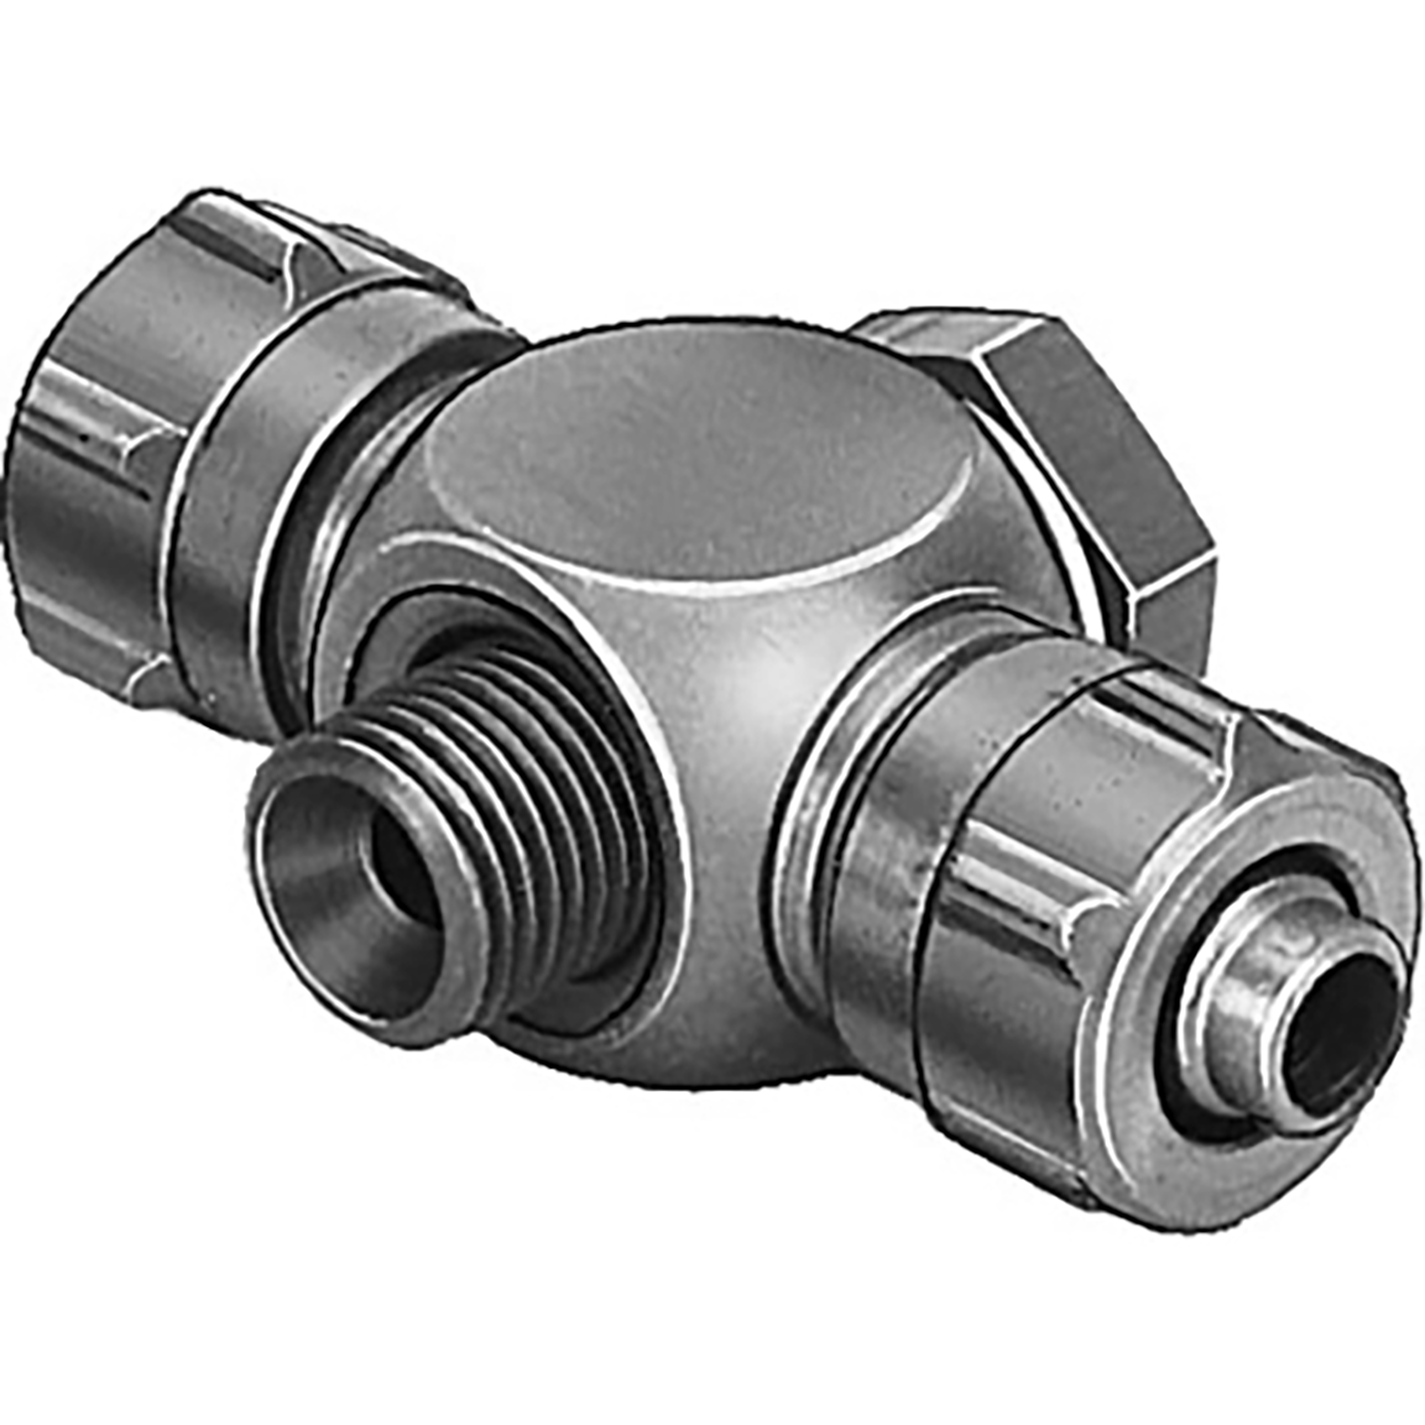 TCK-1/4-PK-6-KU QUICK T-CONNECTOR sold in multiples of 10 only